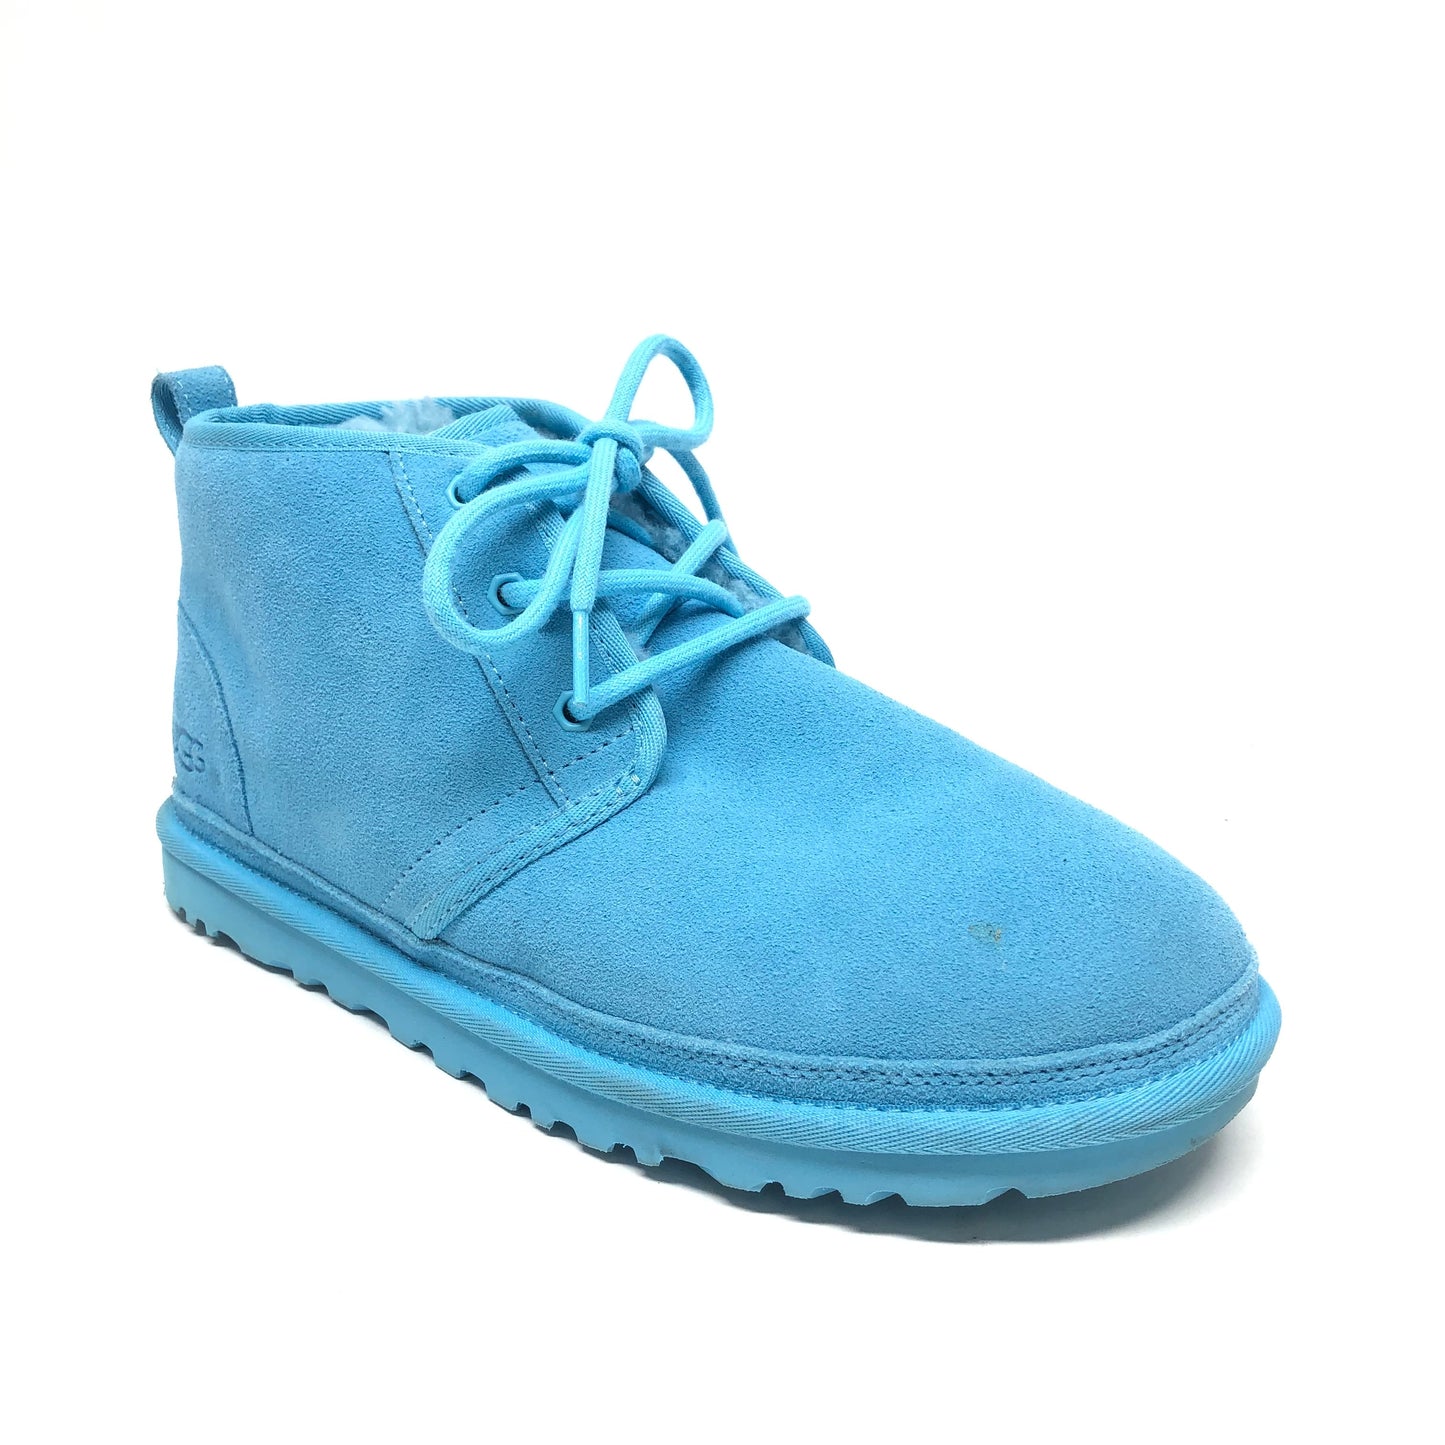 Blue Boots Ankle Flats Ugg, Size 11